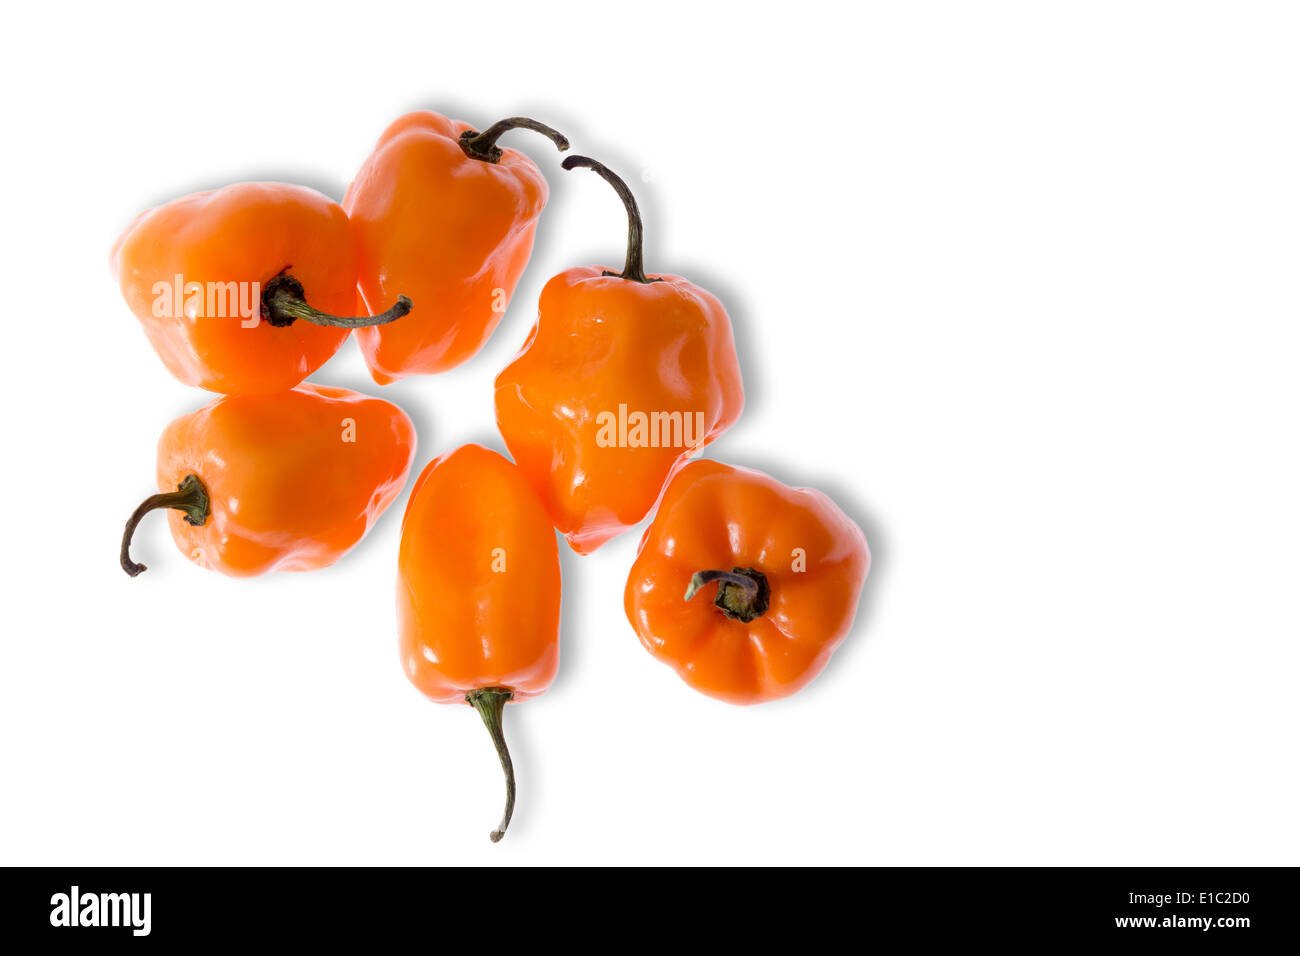 Colorful fresh orange habanero peppers, a cultivar of capsicum with an extremely hot pungent flavor used as an ingredient Stock Photo